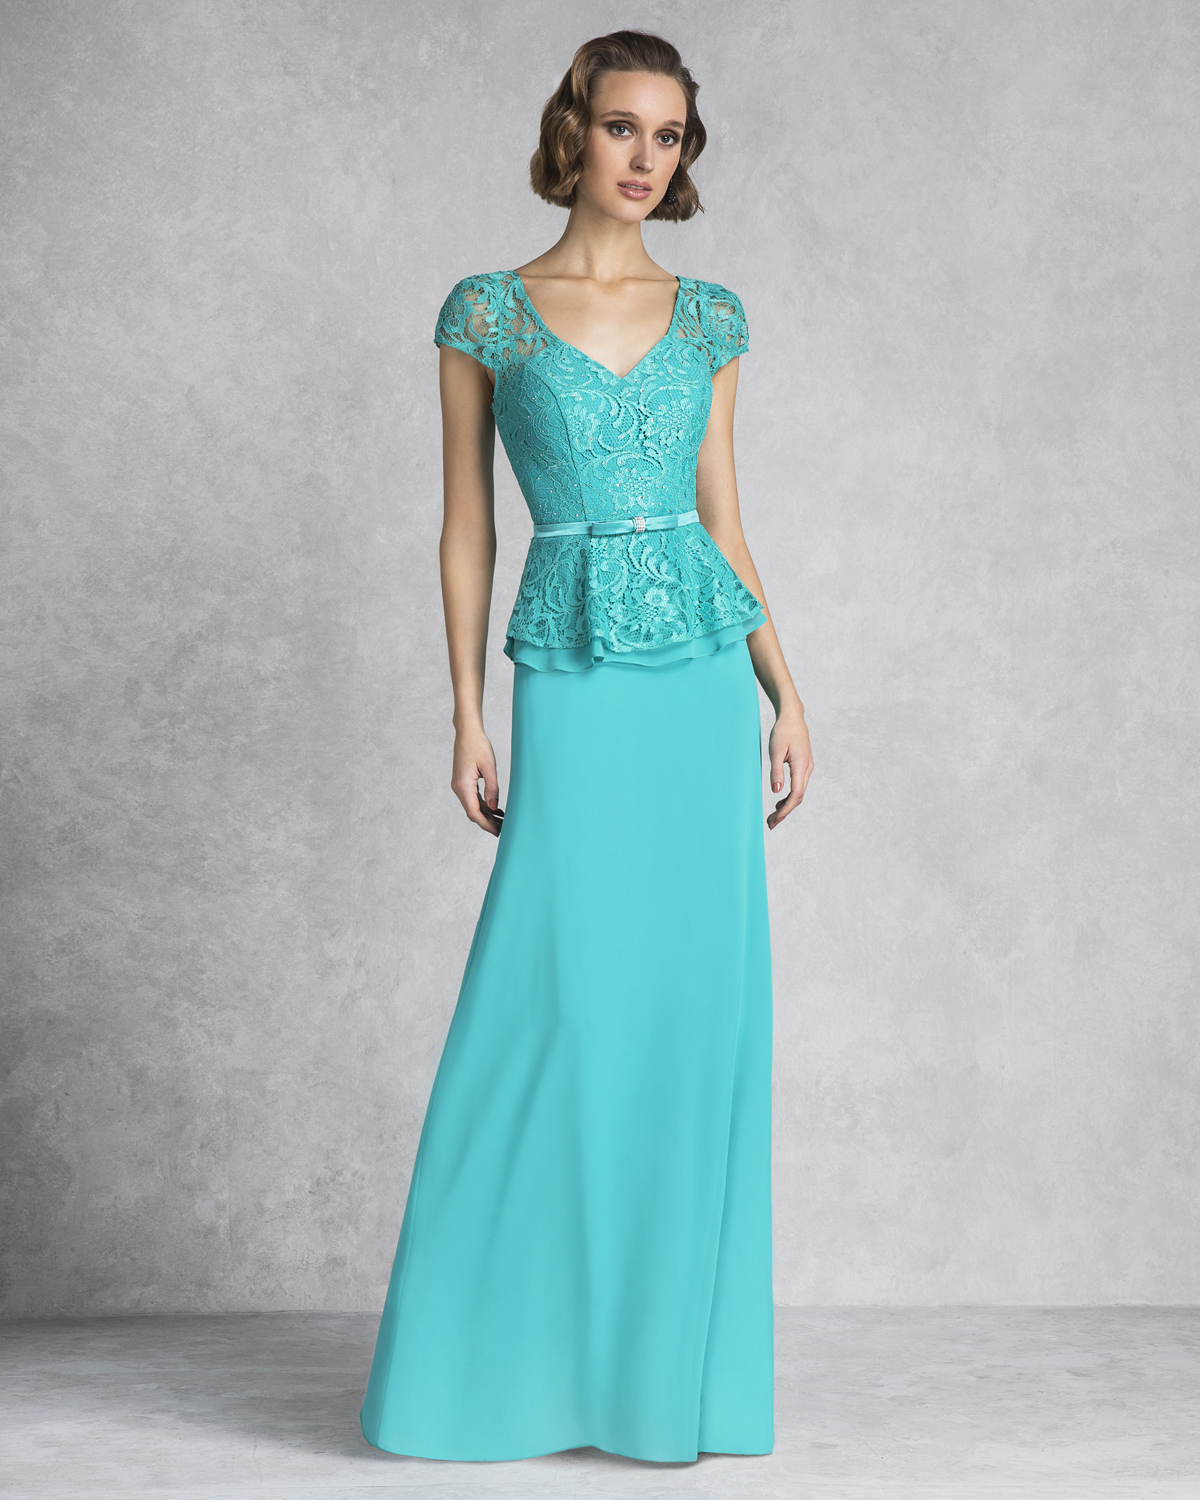 Long evening dress with lace top